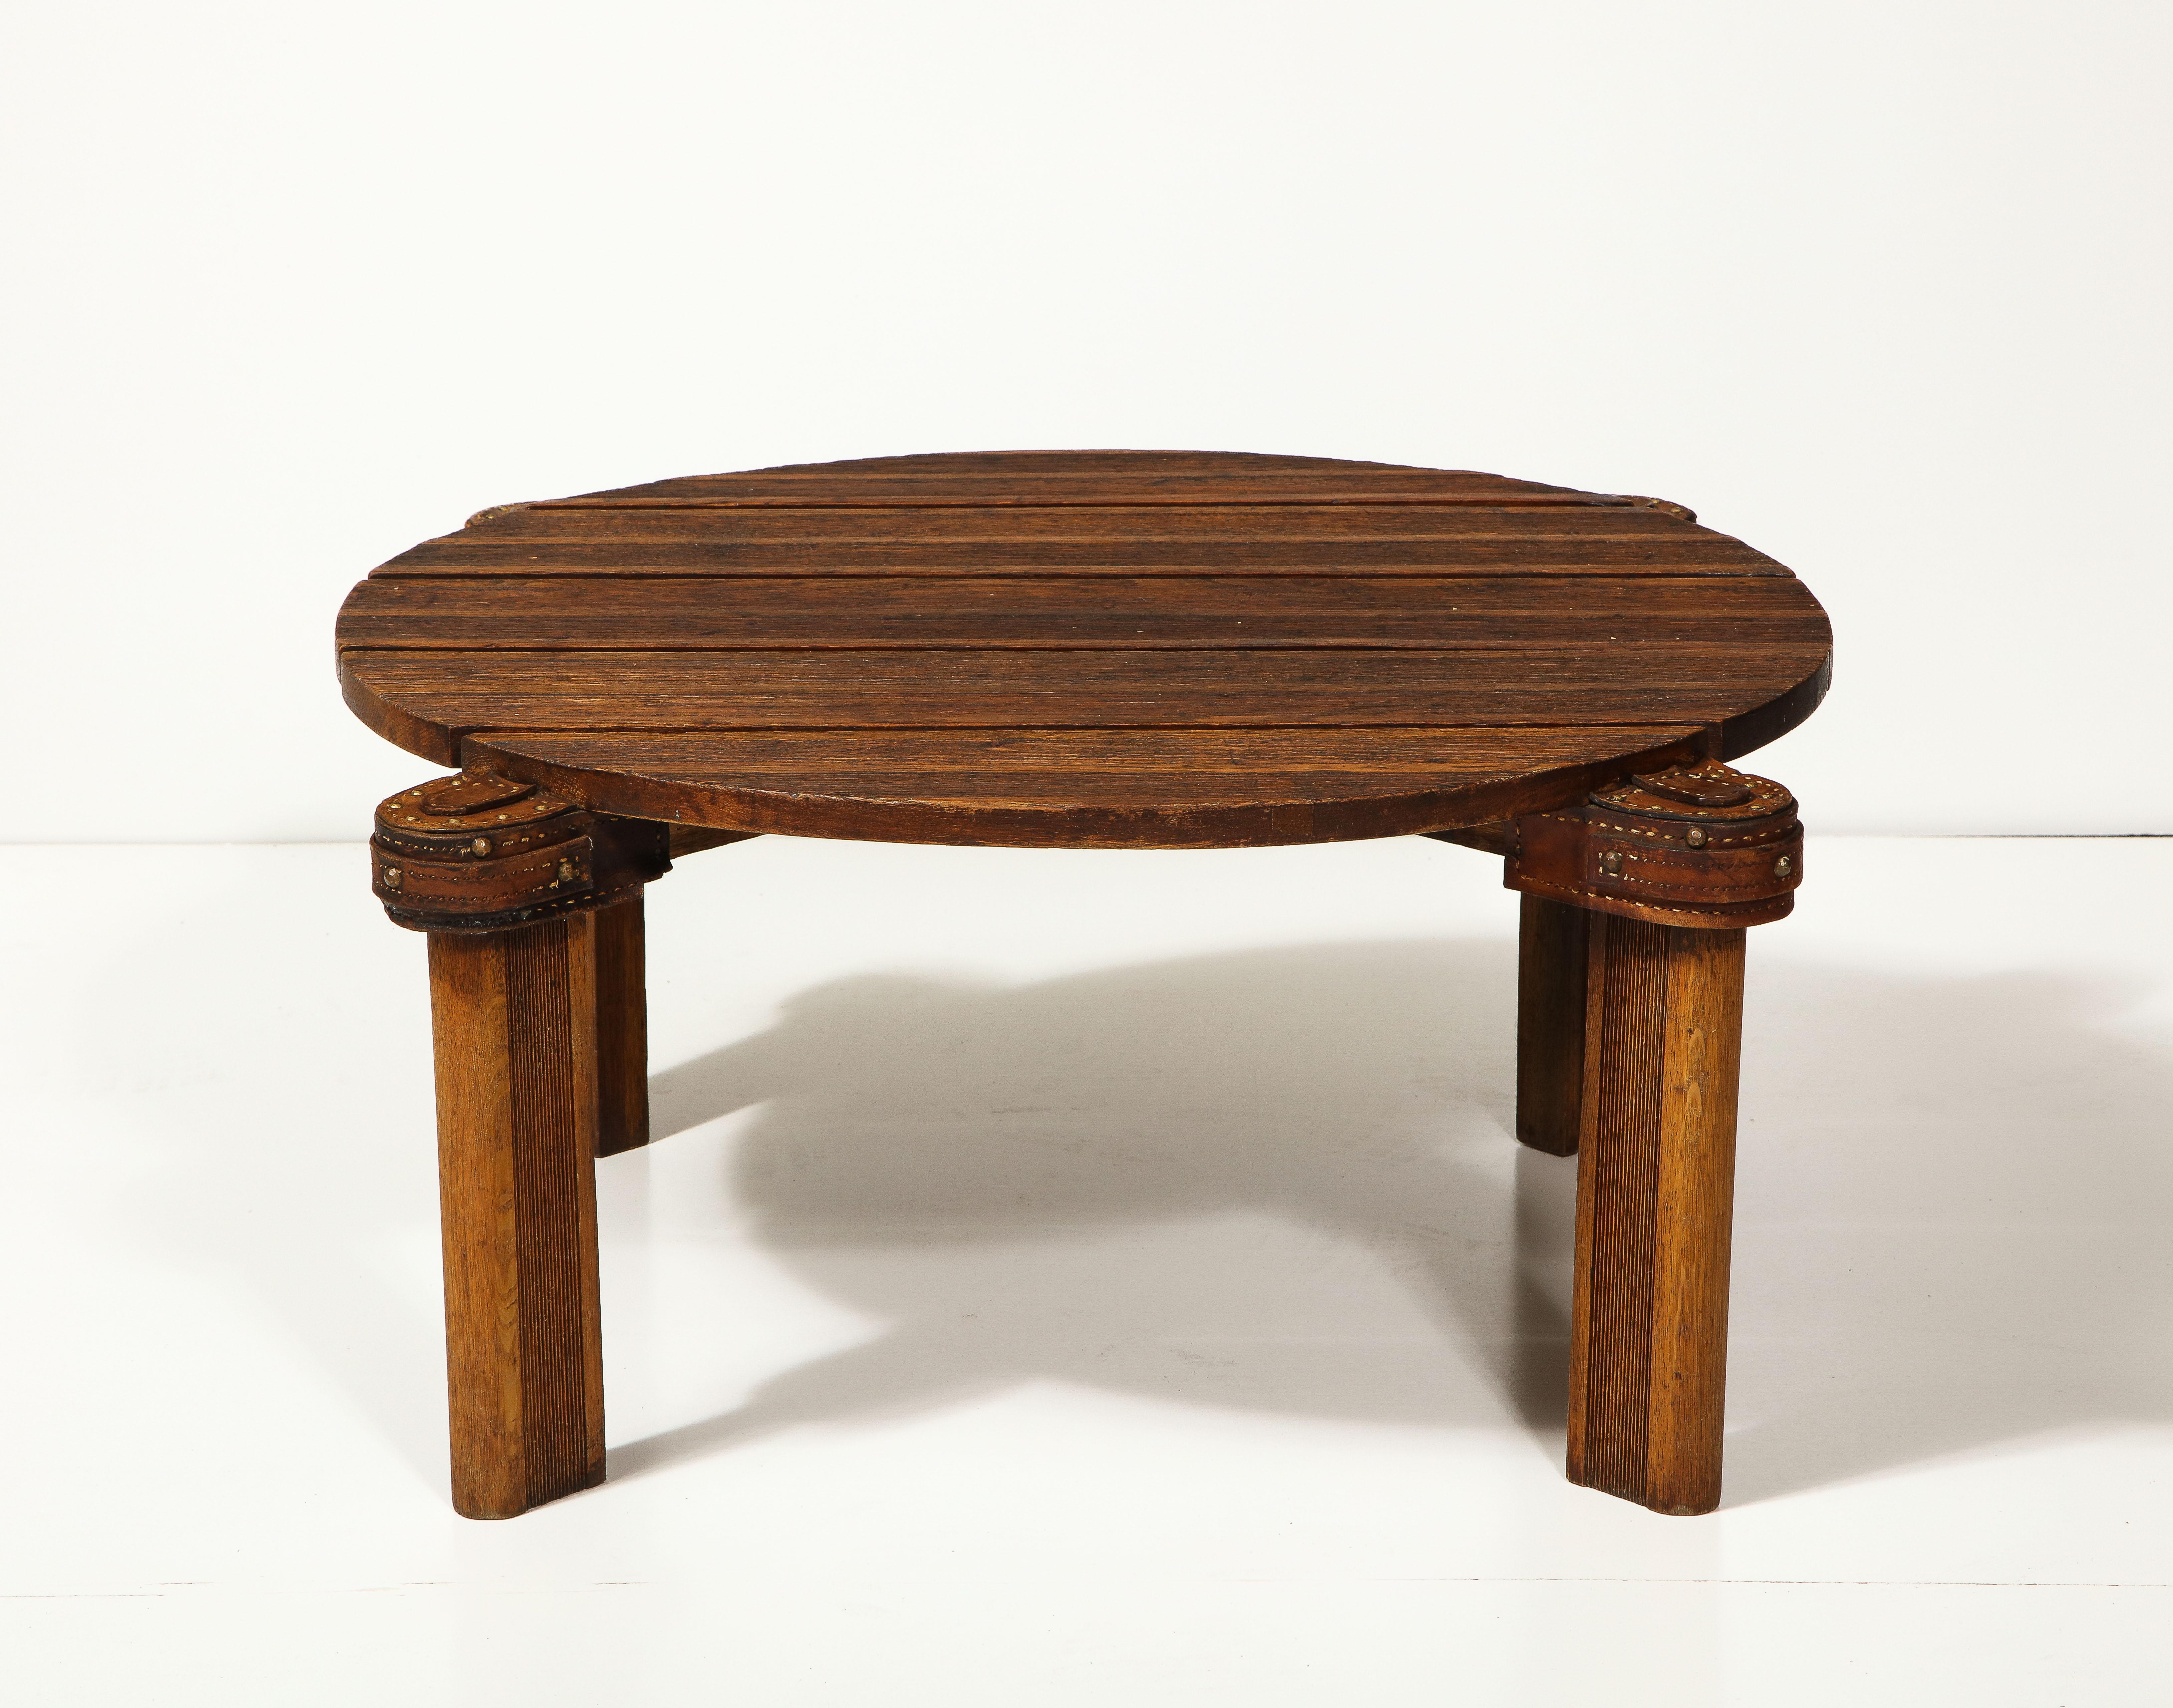 Round oak and leather coffee table by Jacques Adnet, France, c. mid-20th century 

This simple yet sophisticated table consists of reeded legs, a slatted plank top, and handsome stitched leather details typical of Adnet.